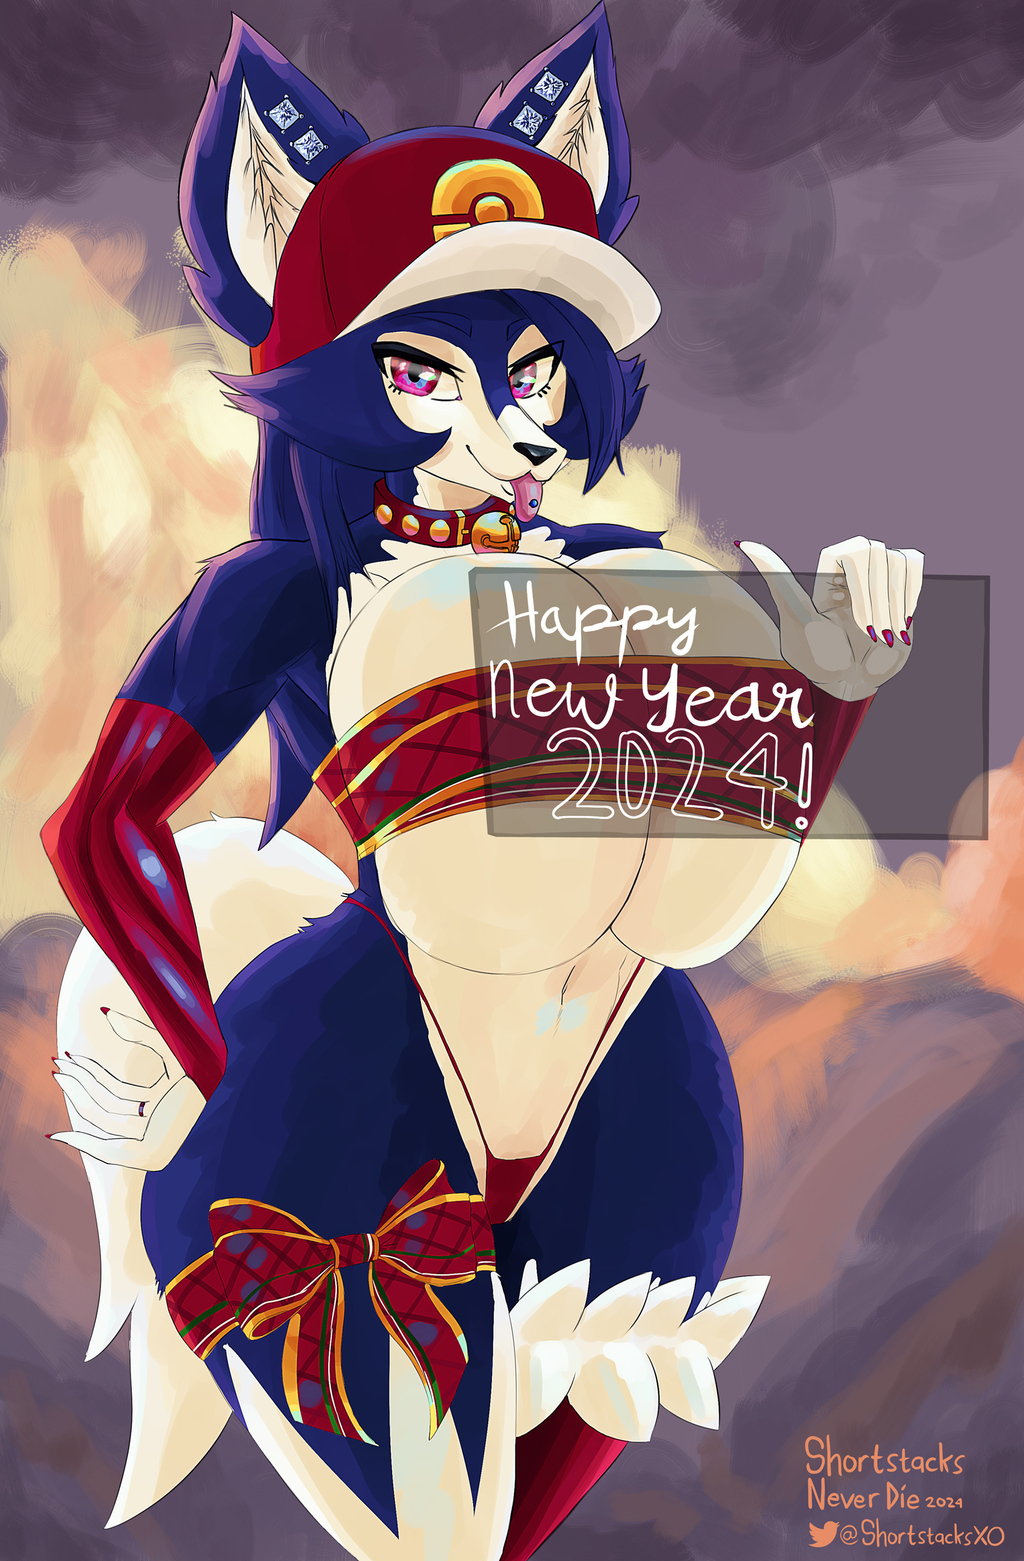 Most recent image: Happy New Year 2024 - Morgana the Lycanroc